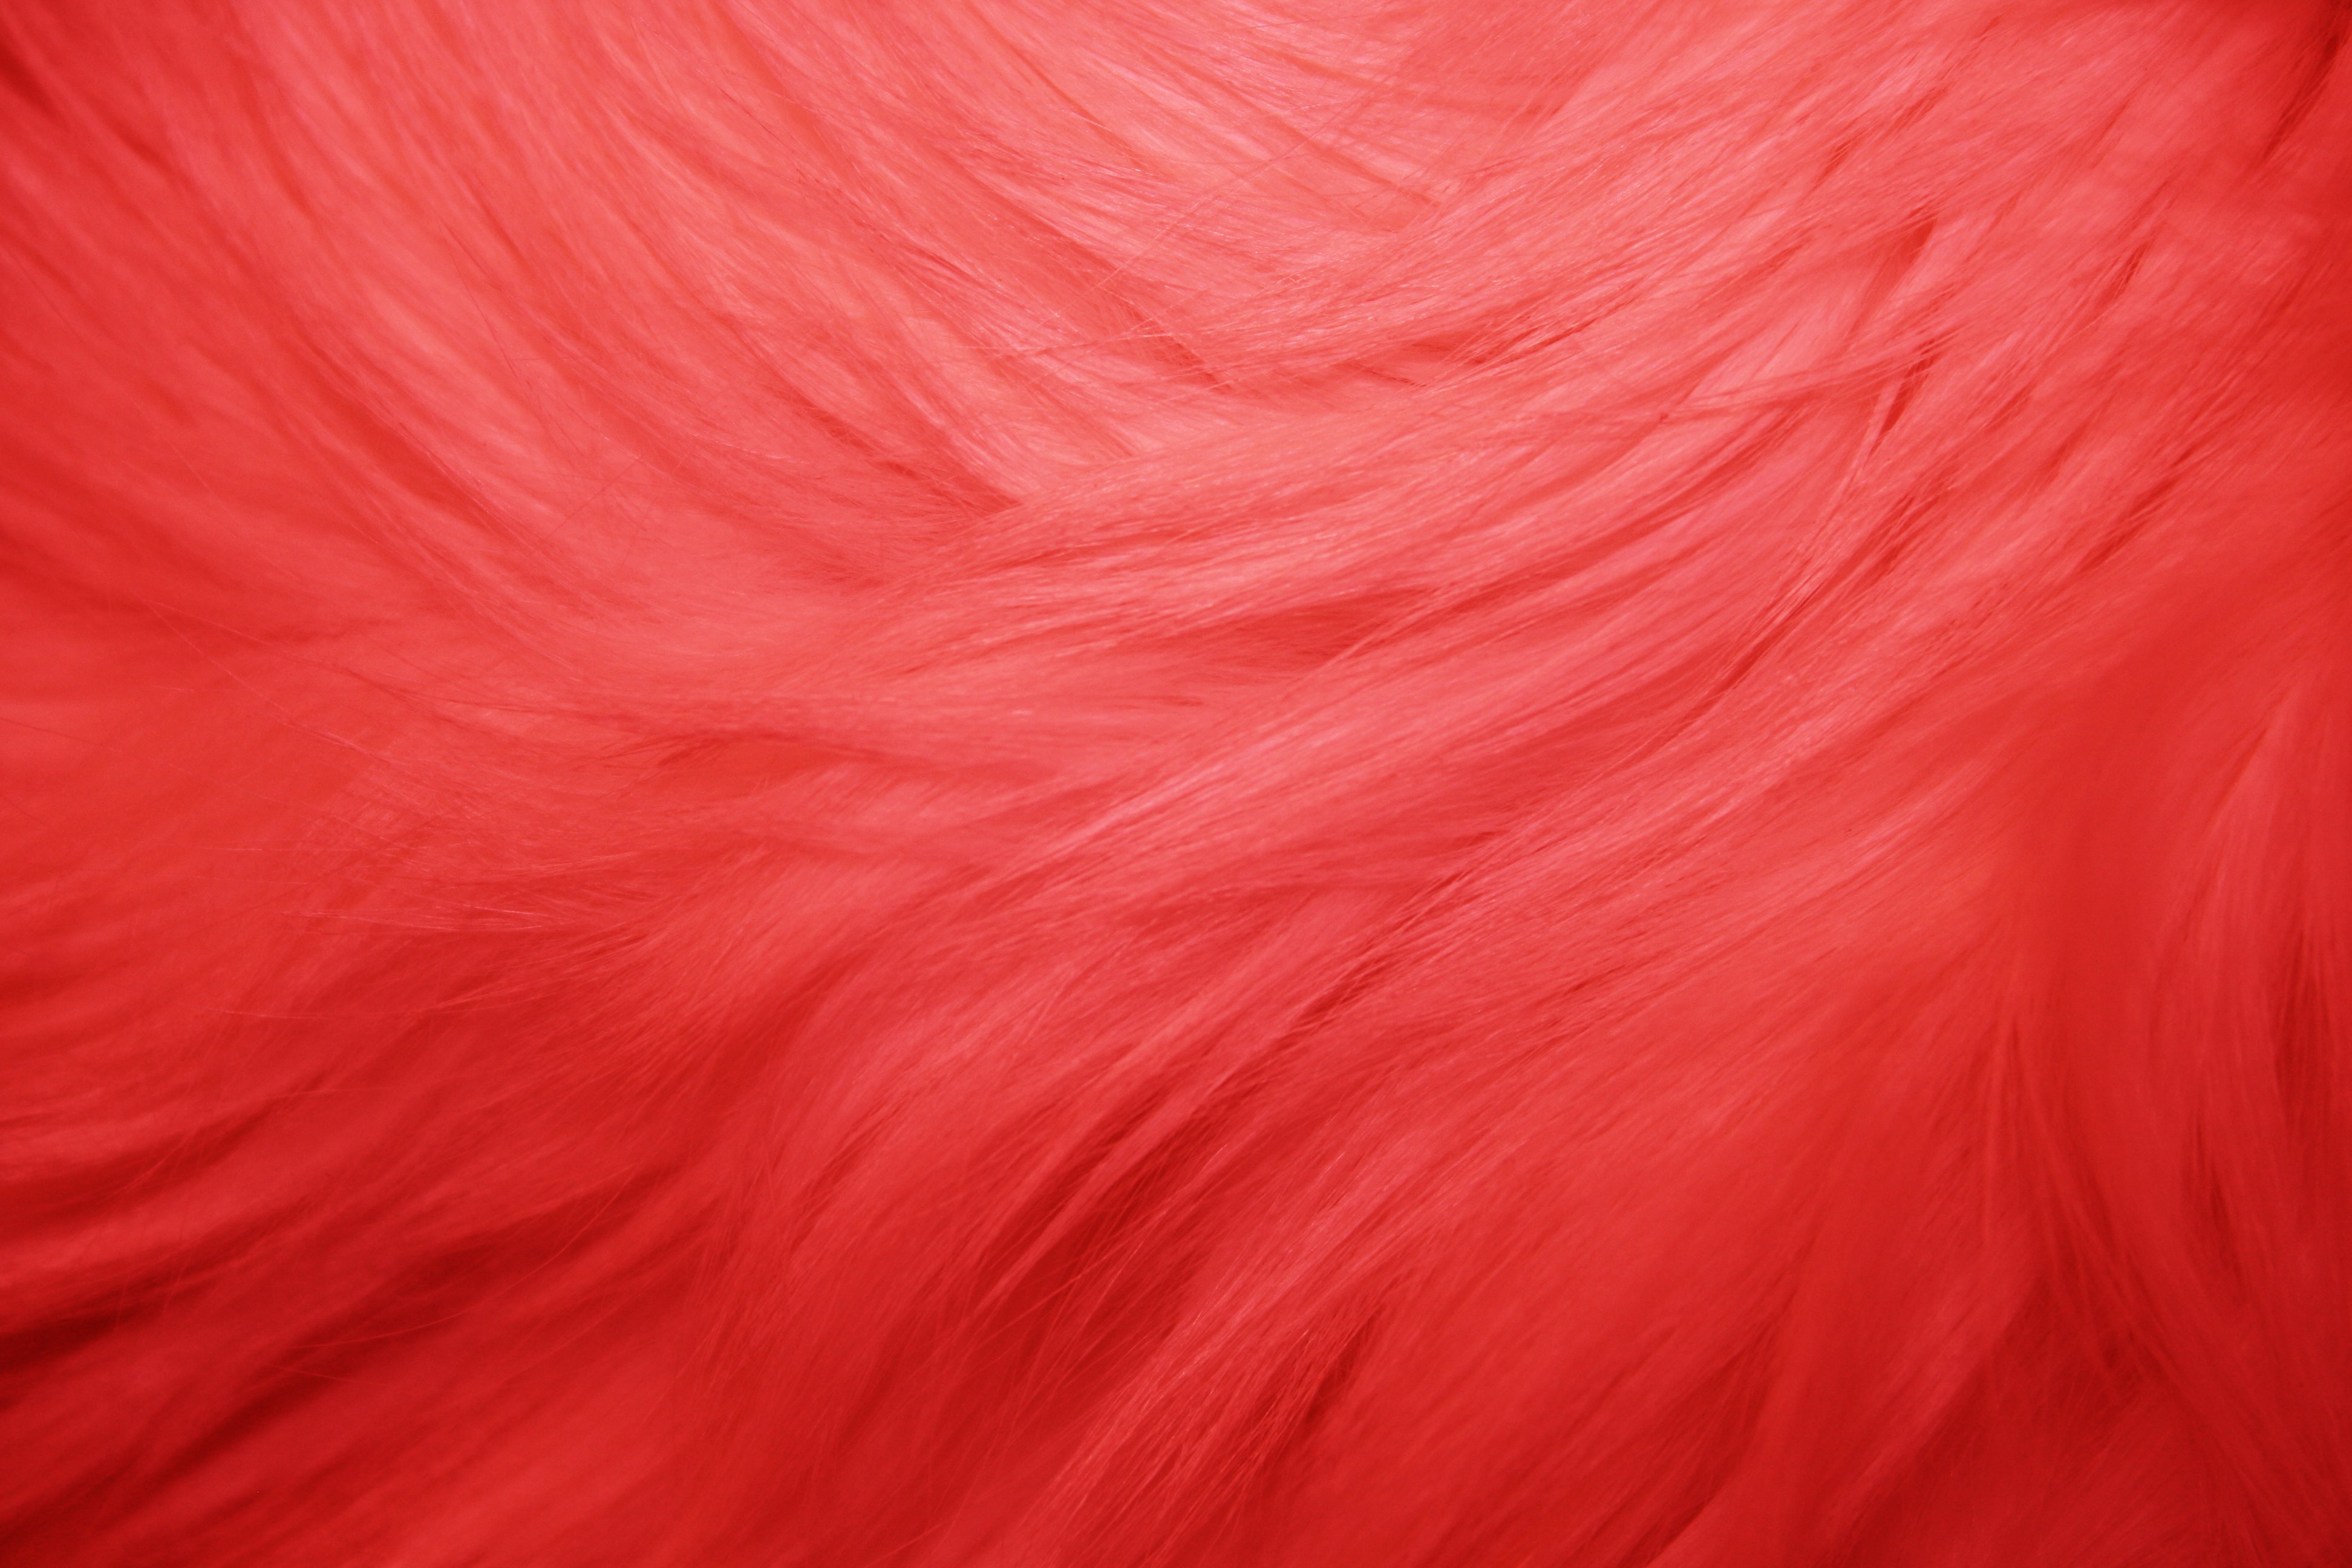 Red Fur Texture Picture, Free Photograph